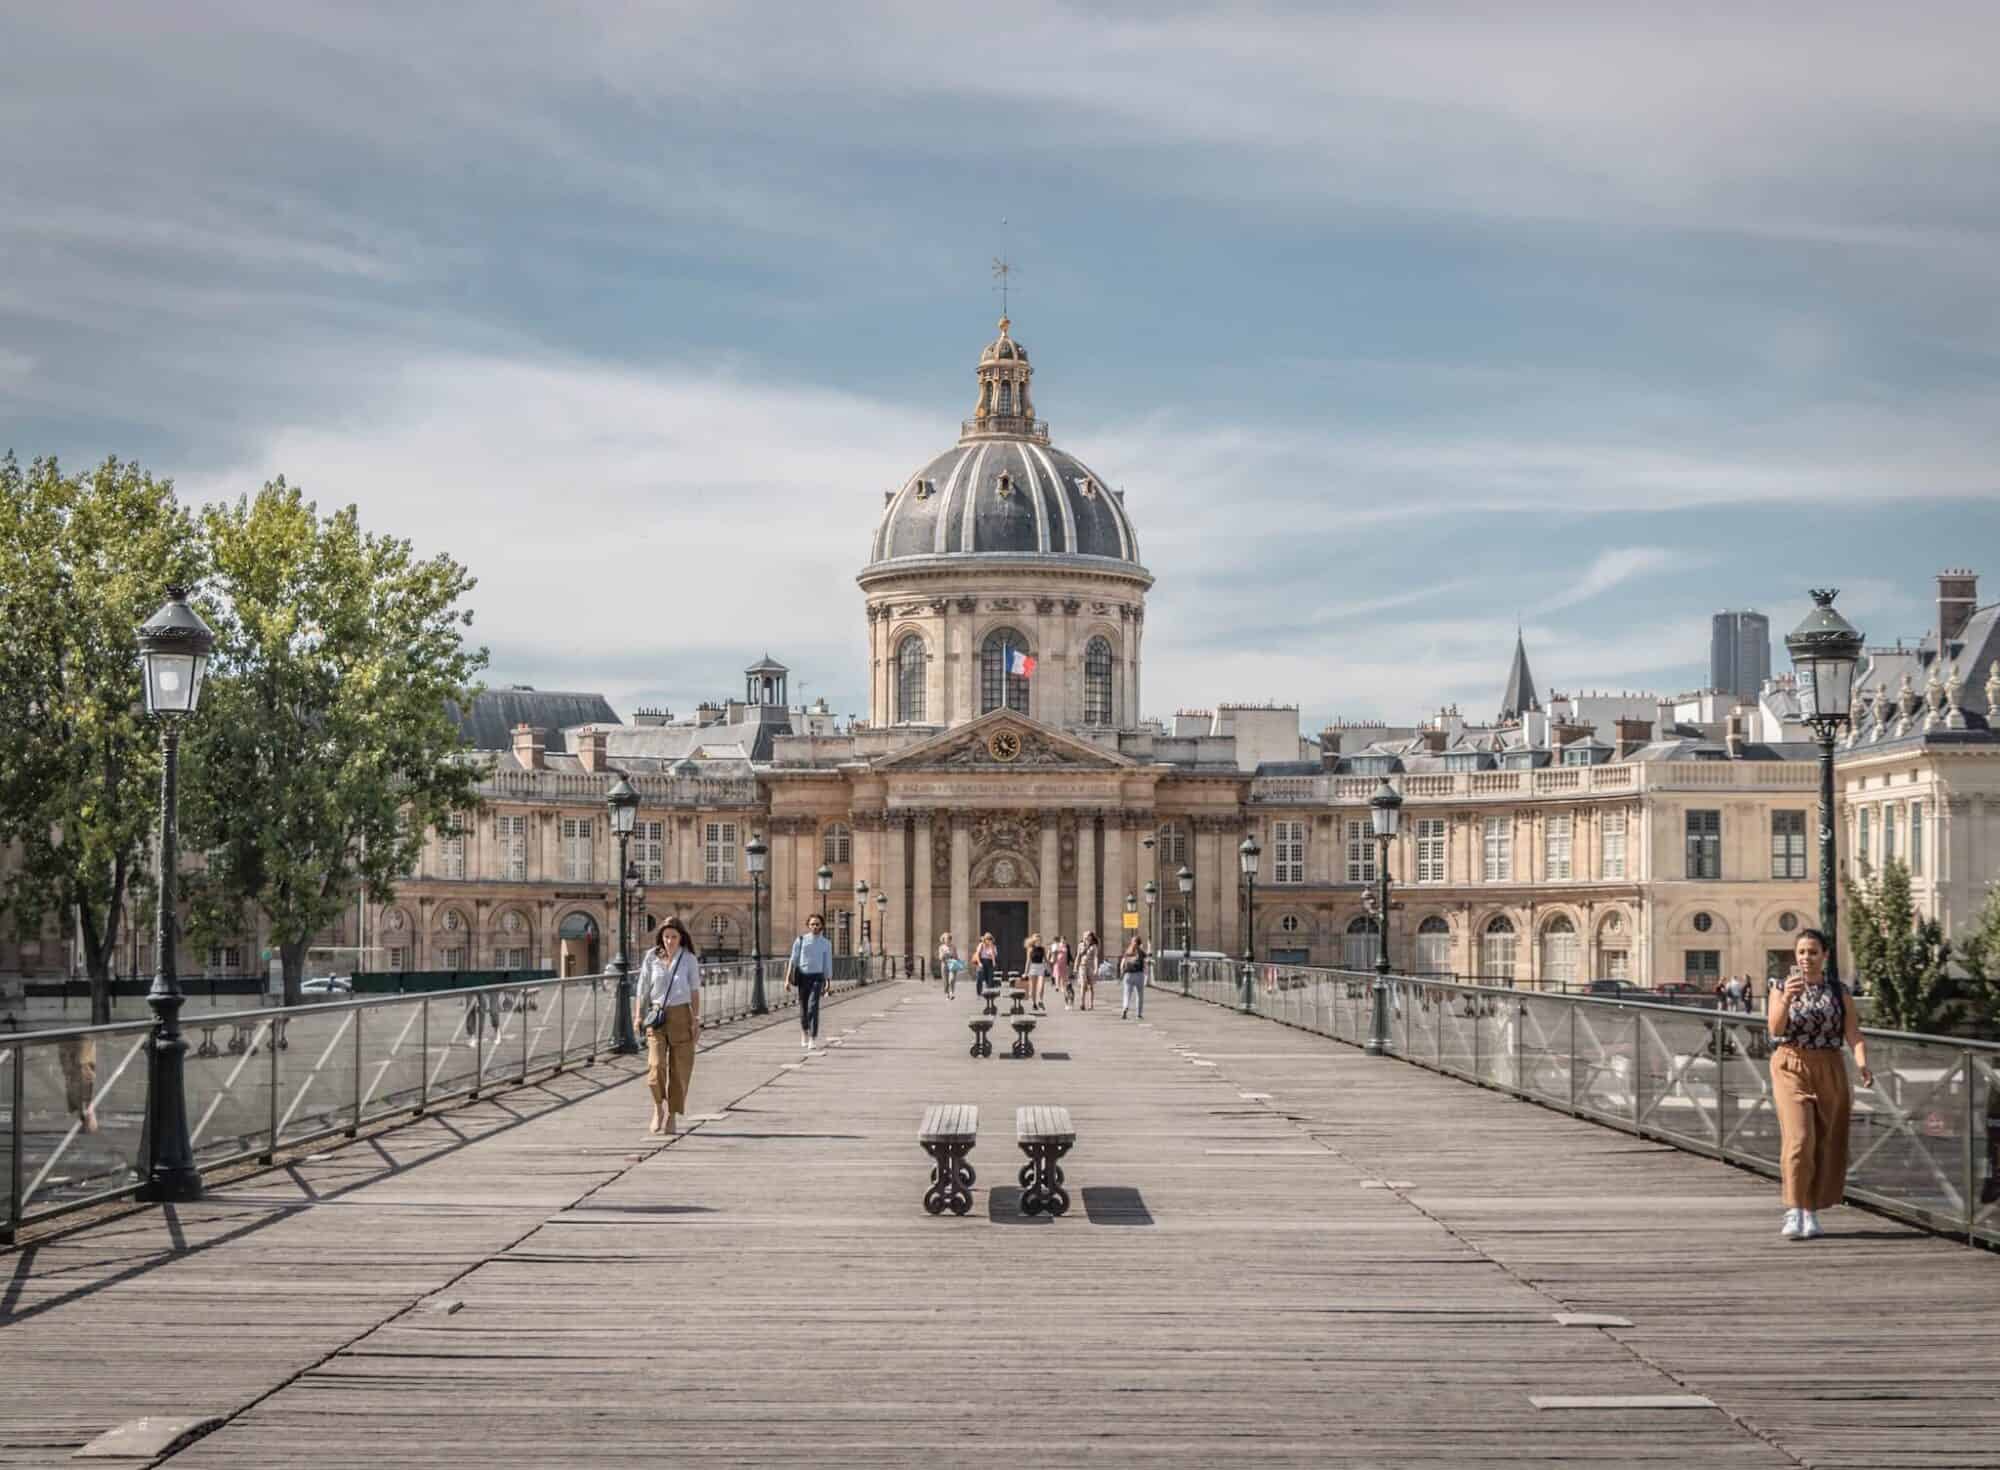 A view of the Institut de France from the Pont des Arts bridge in Paris, where people are seen walking on either side of the bridge.